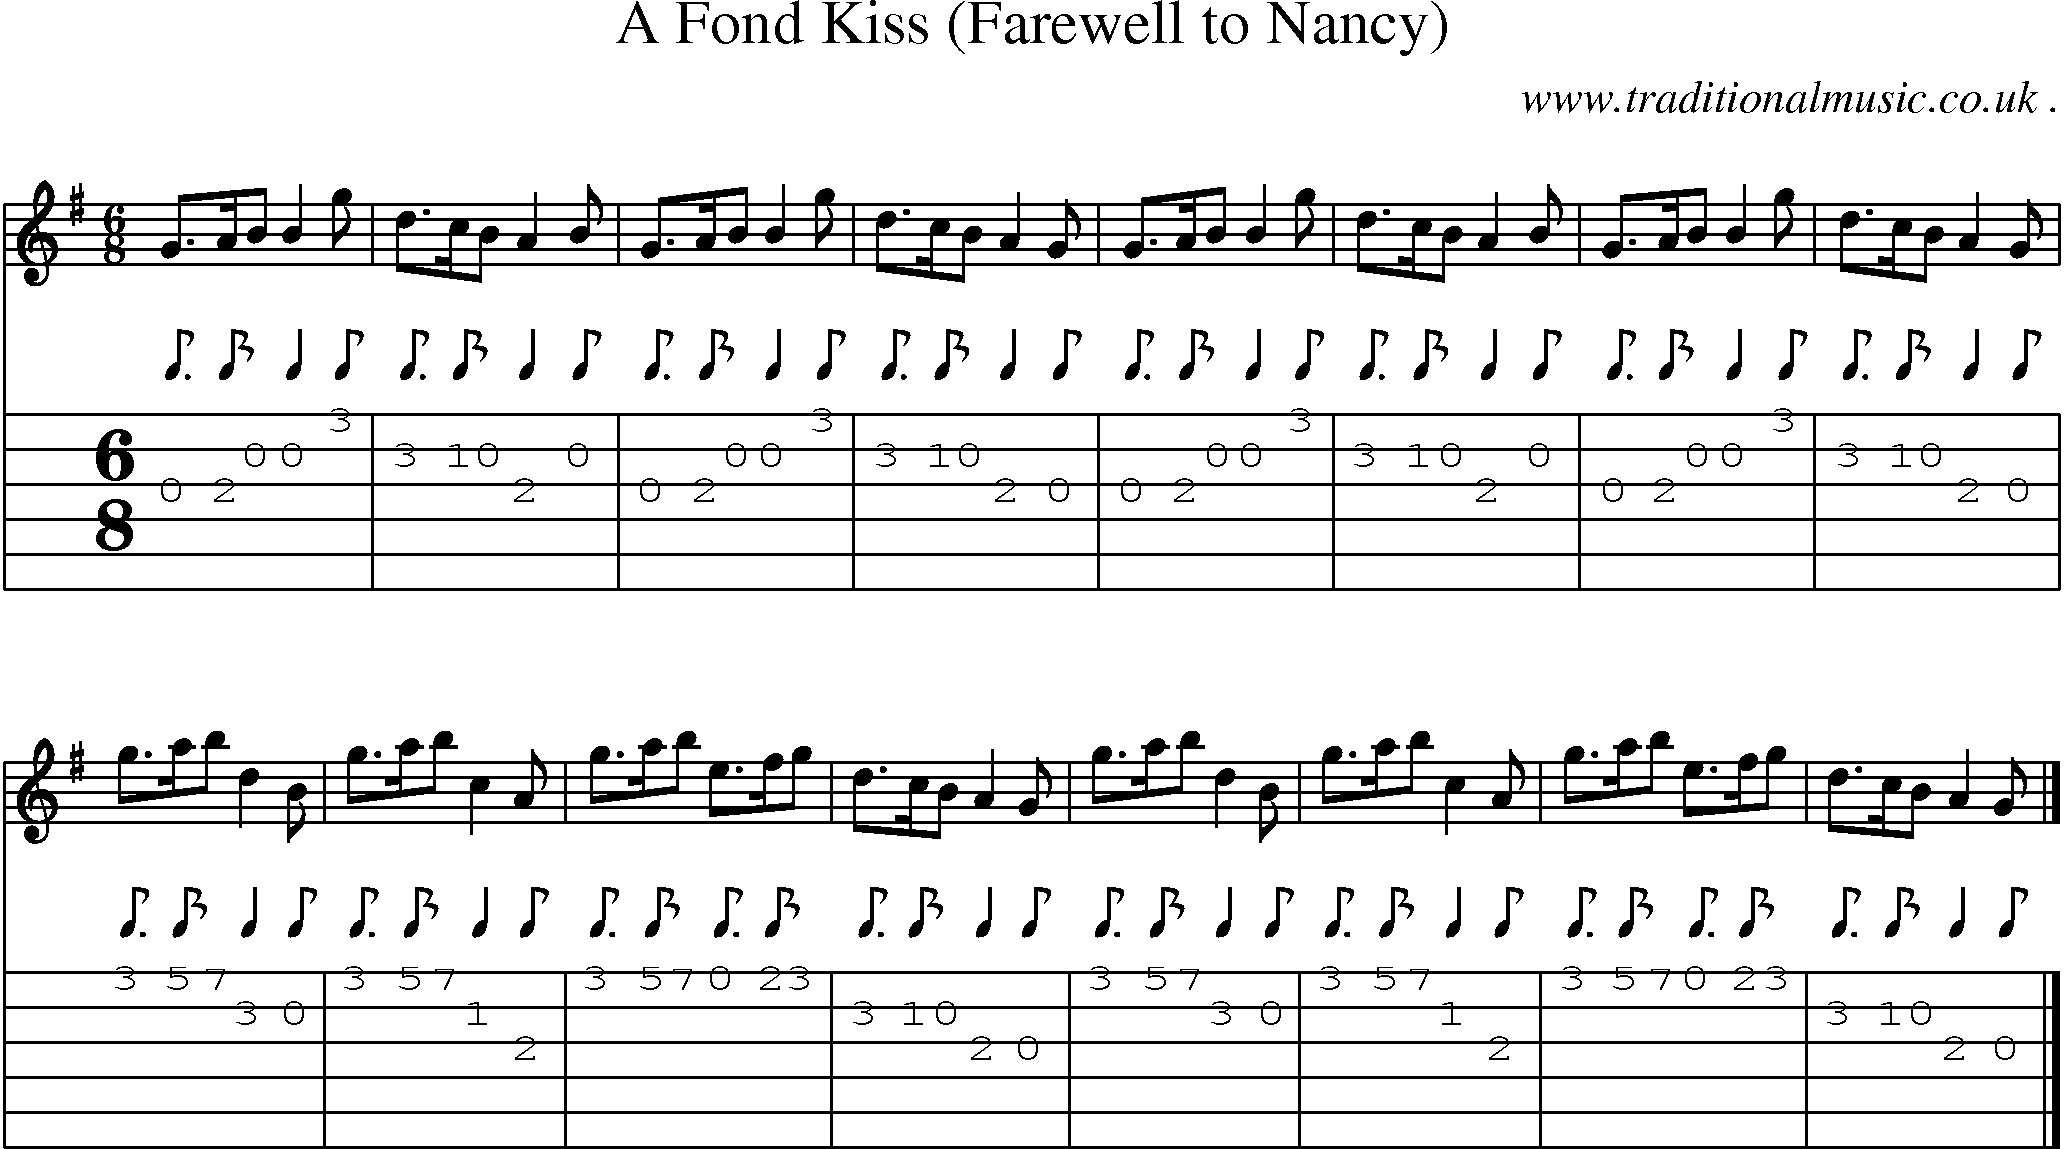 Sheet-music  score, Chords and Guitar Tabs for A Fond Kiss Farewell To Nancy